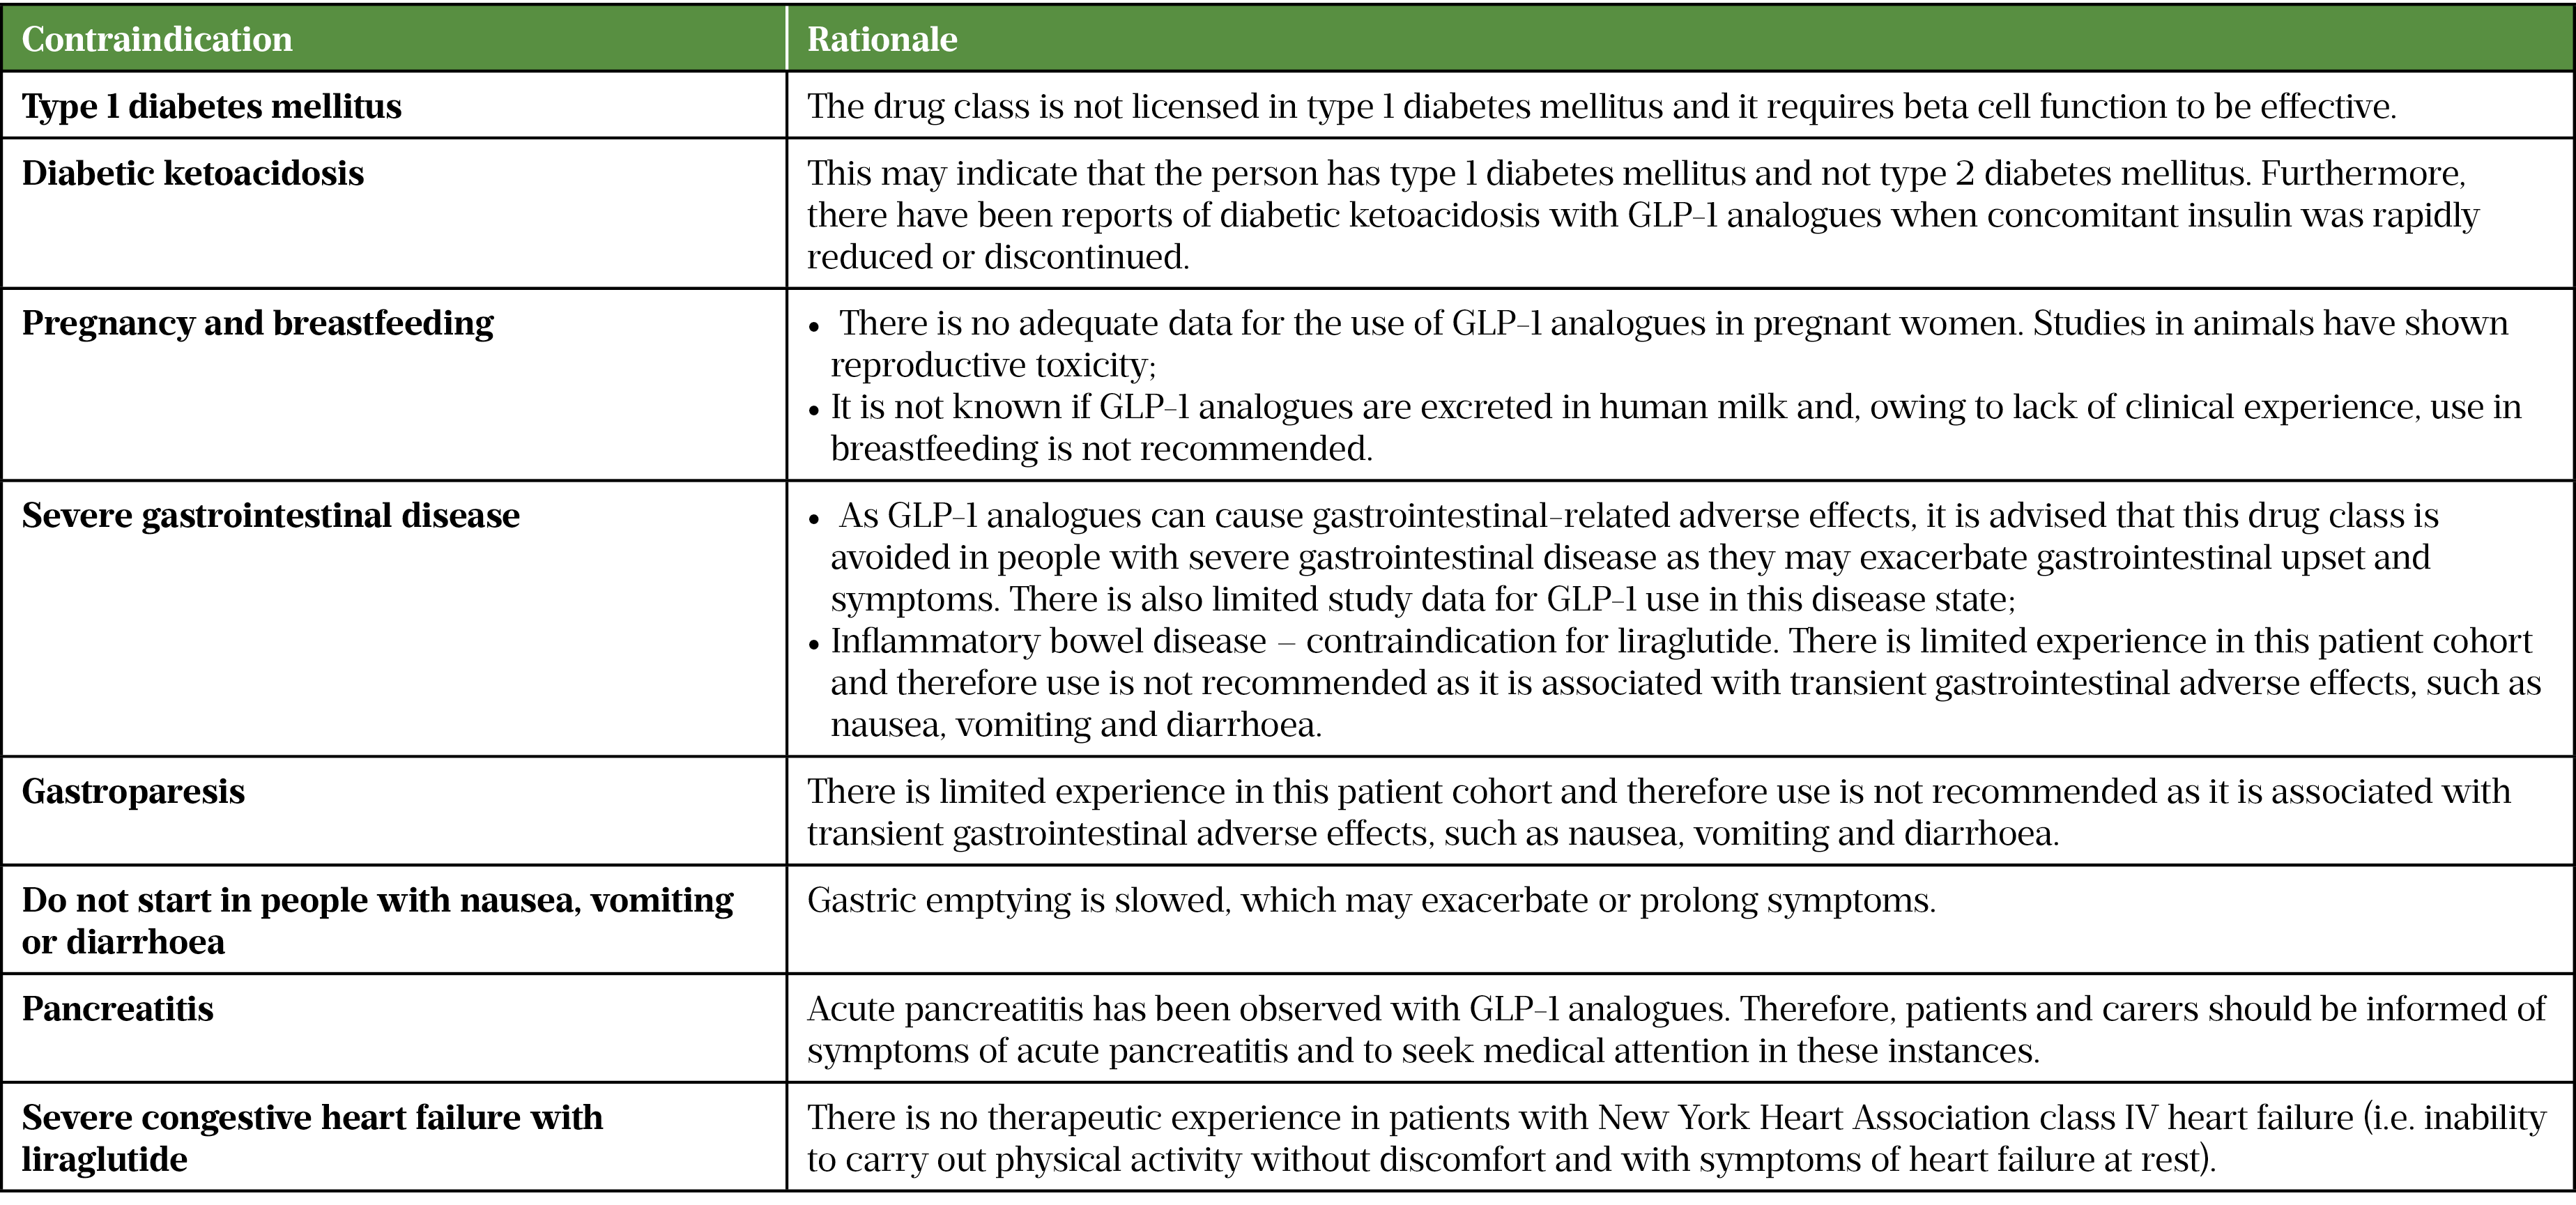 Table 2- In which patient groups should GLP-1 therapy be avoided